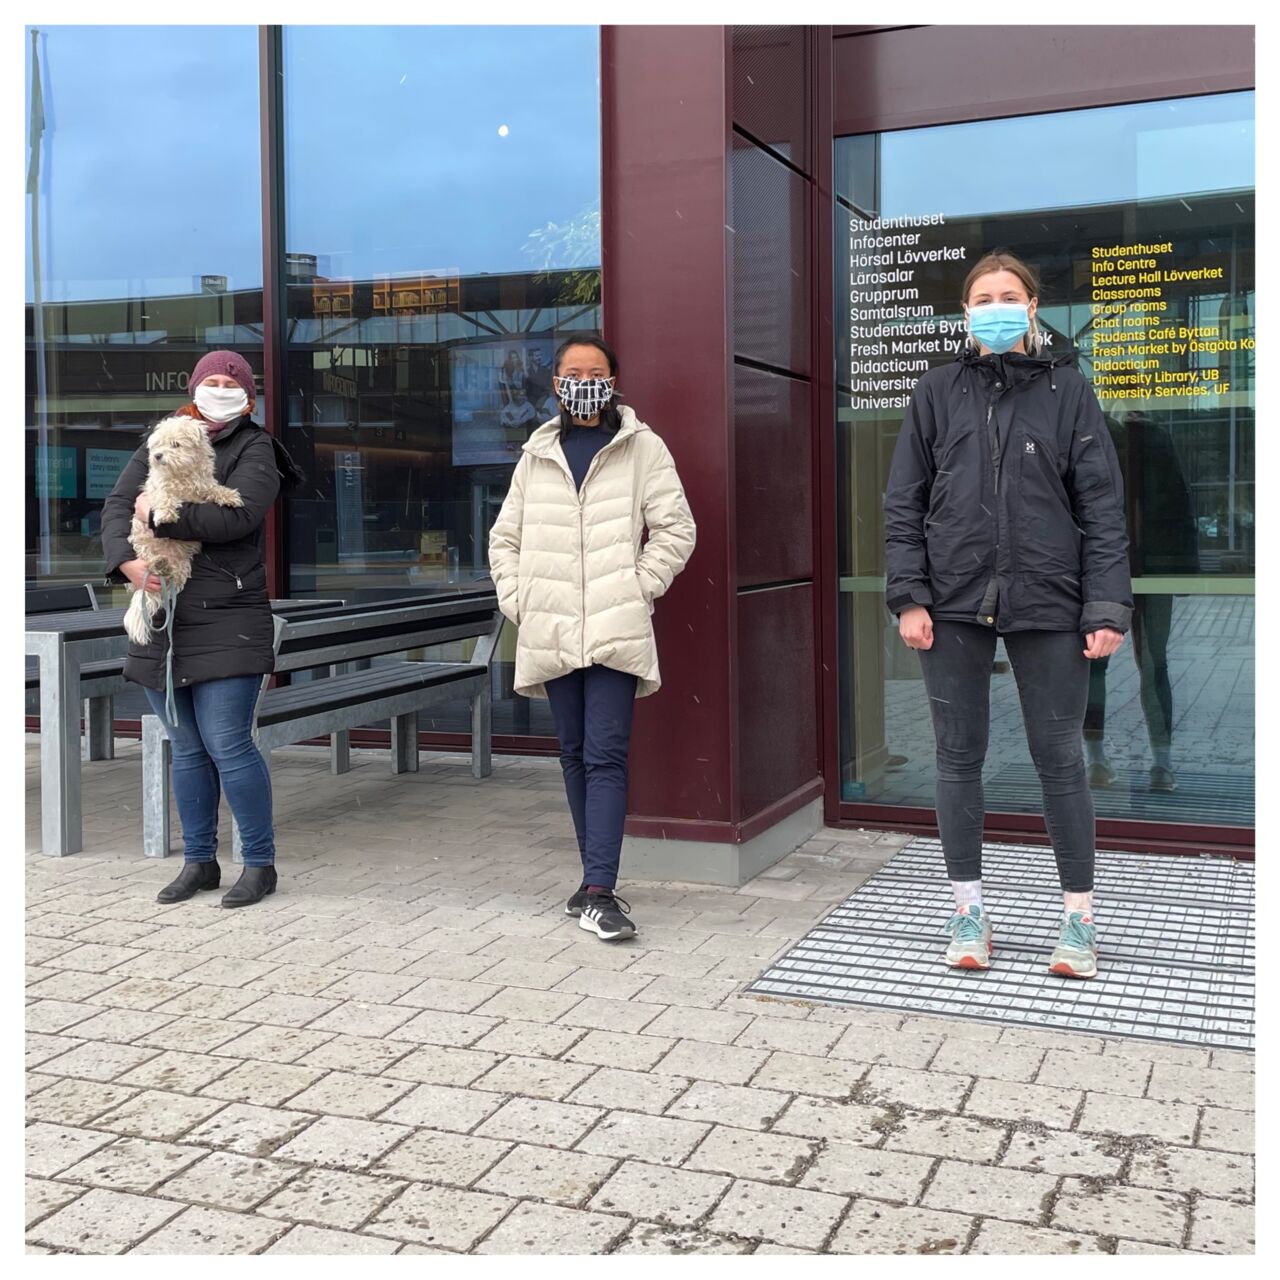 Three people are standing outside the building with face masks.